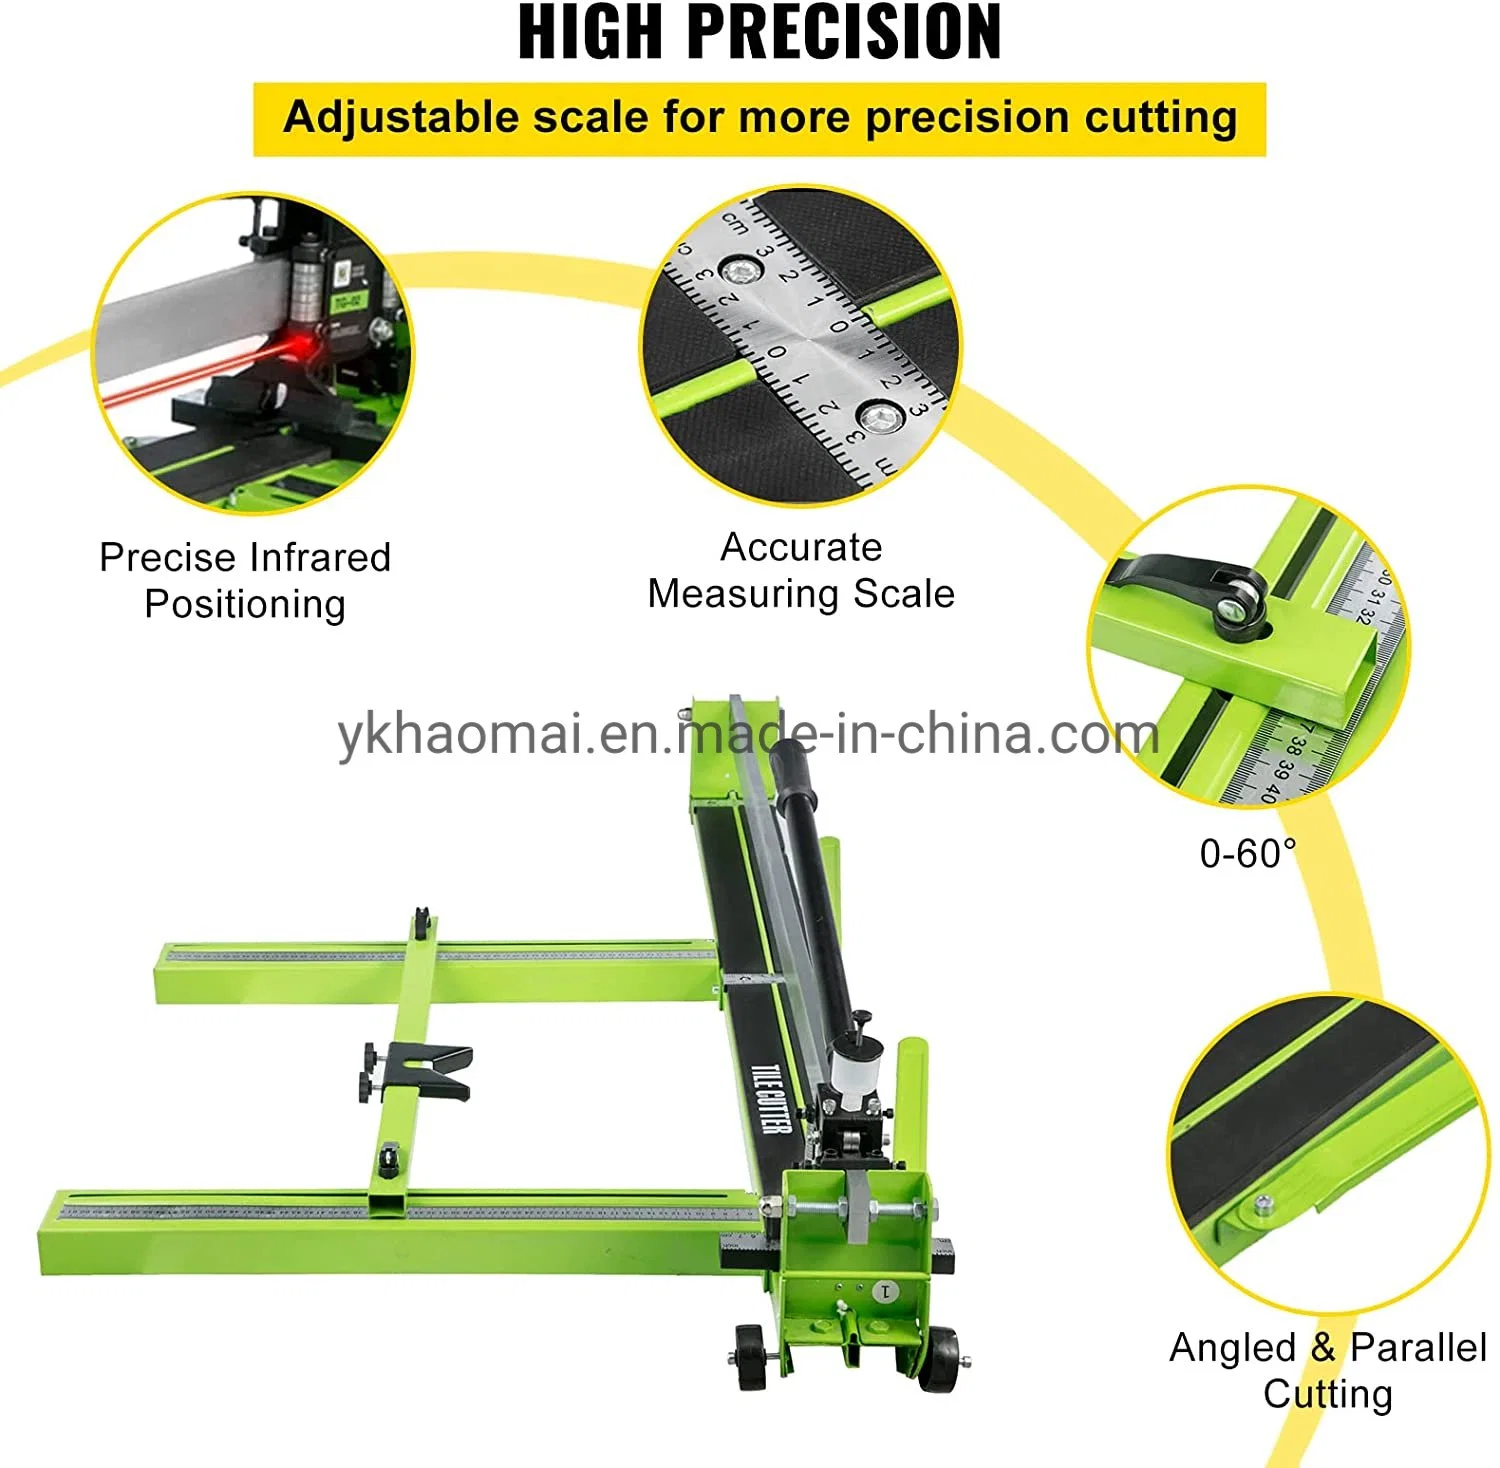 39 Inch 1000mm Manual Tile Cutter All-Steel Frame, Tile Cutting Machine W/Laser Guide and Bonus Spare Tile Cutter Hand Tool for Precision Cutting Porcelain Cera